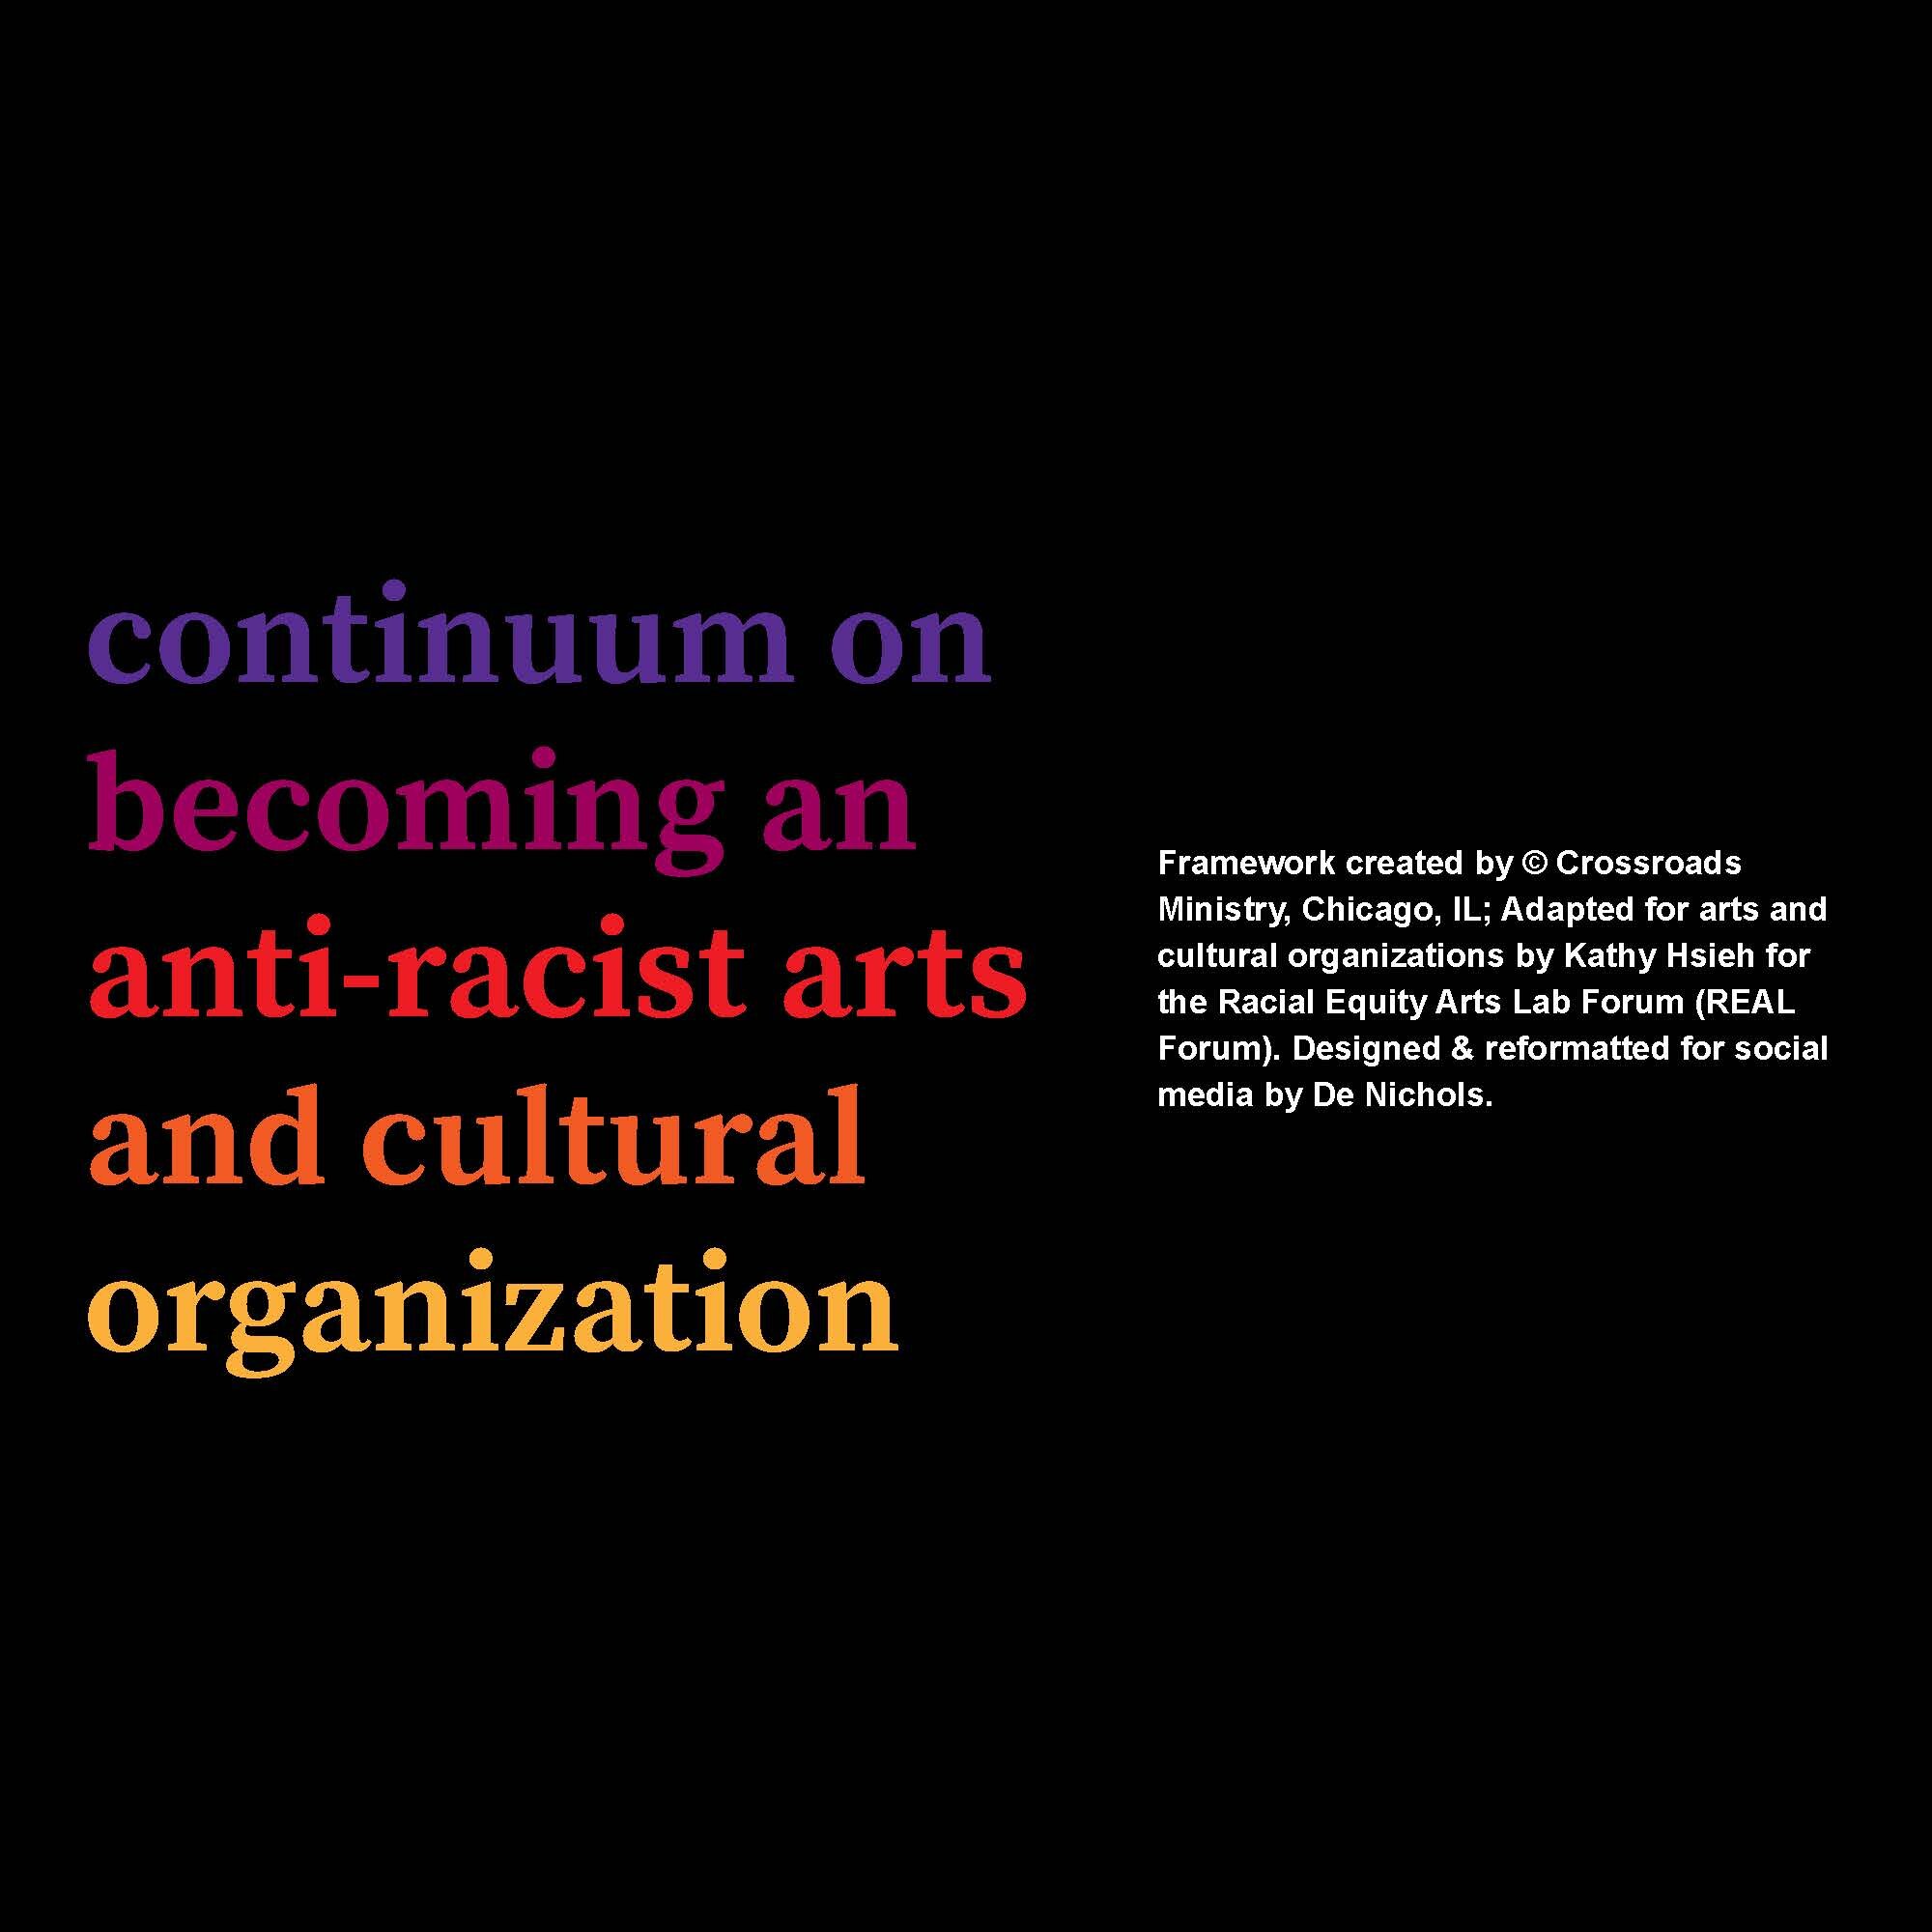 Continuum on Becoming an Anti-Racist Organization_Instagram_Page_1.jpg